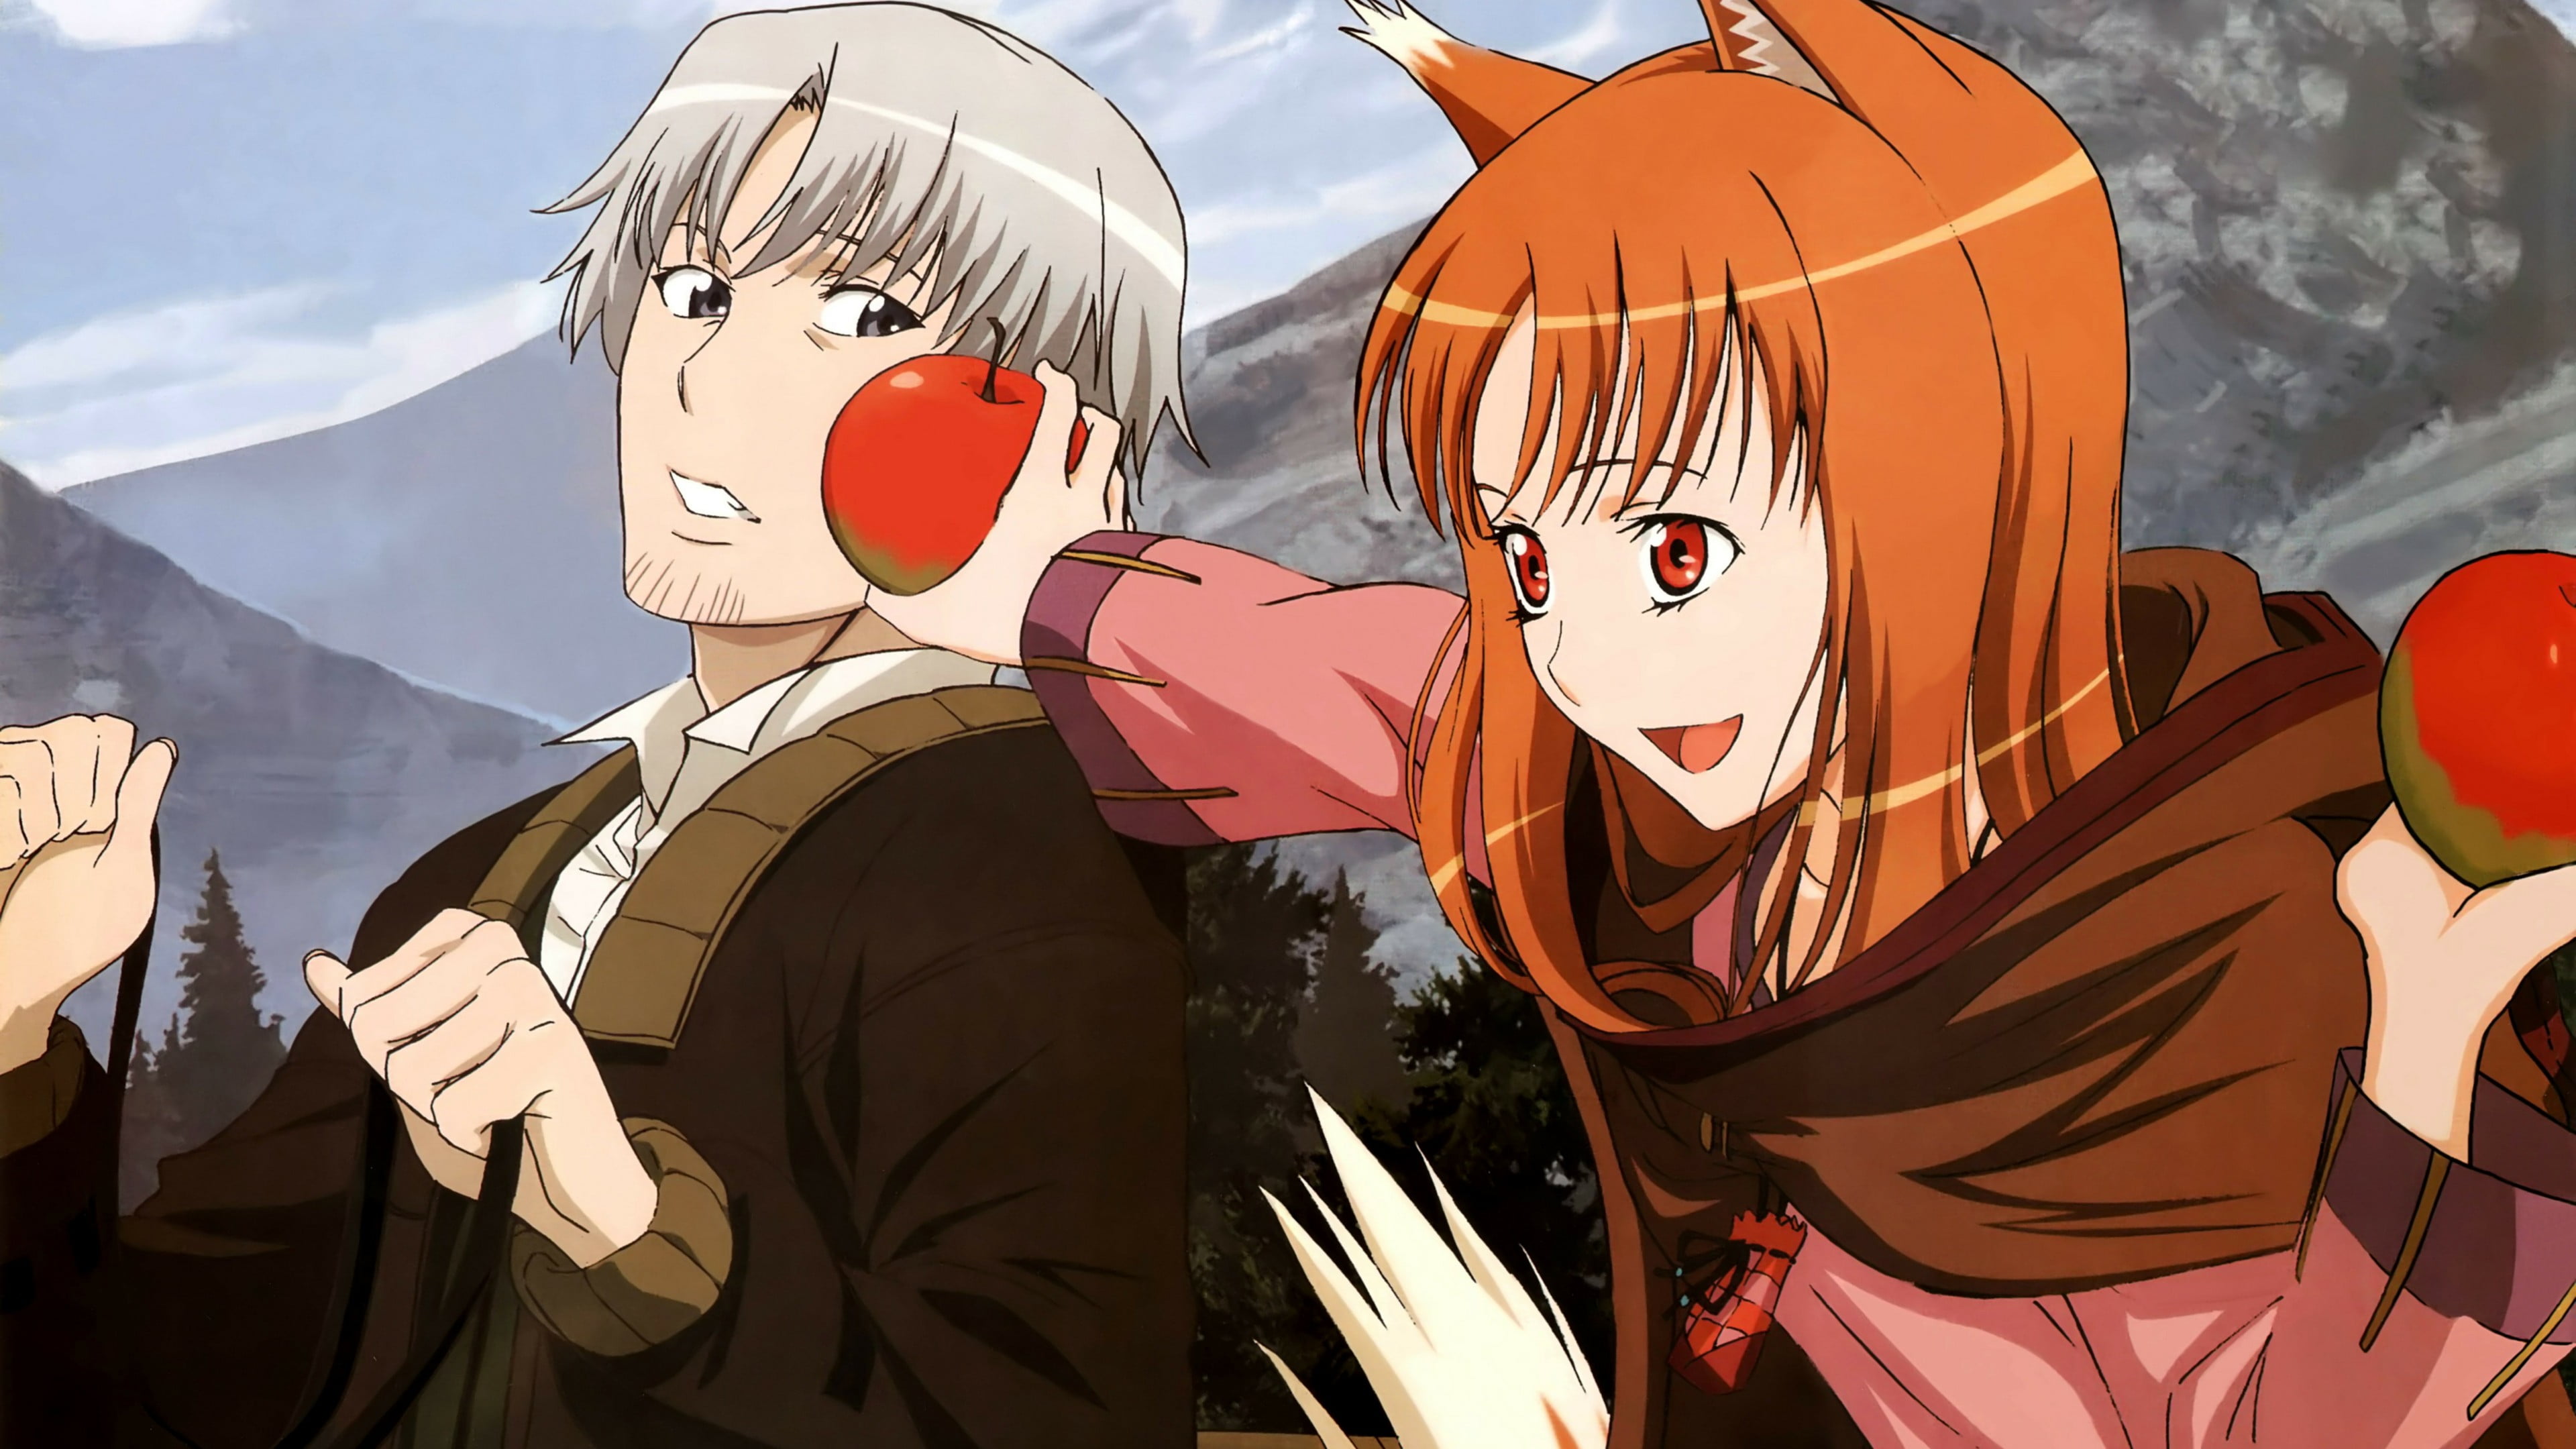 Spice and Wolf, Toradora Will Release Special New Projects Soon